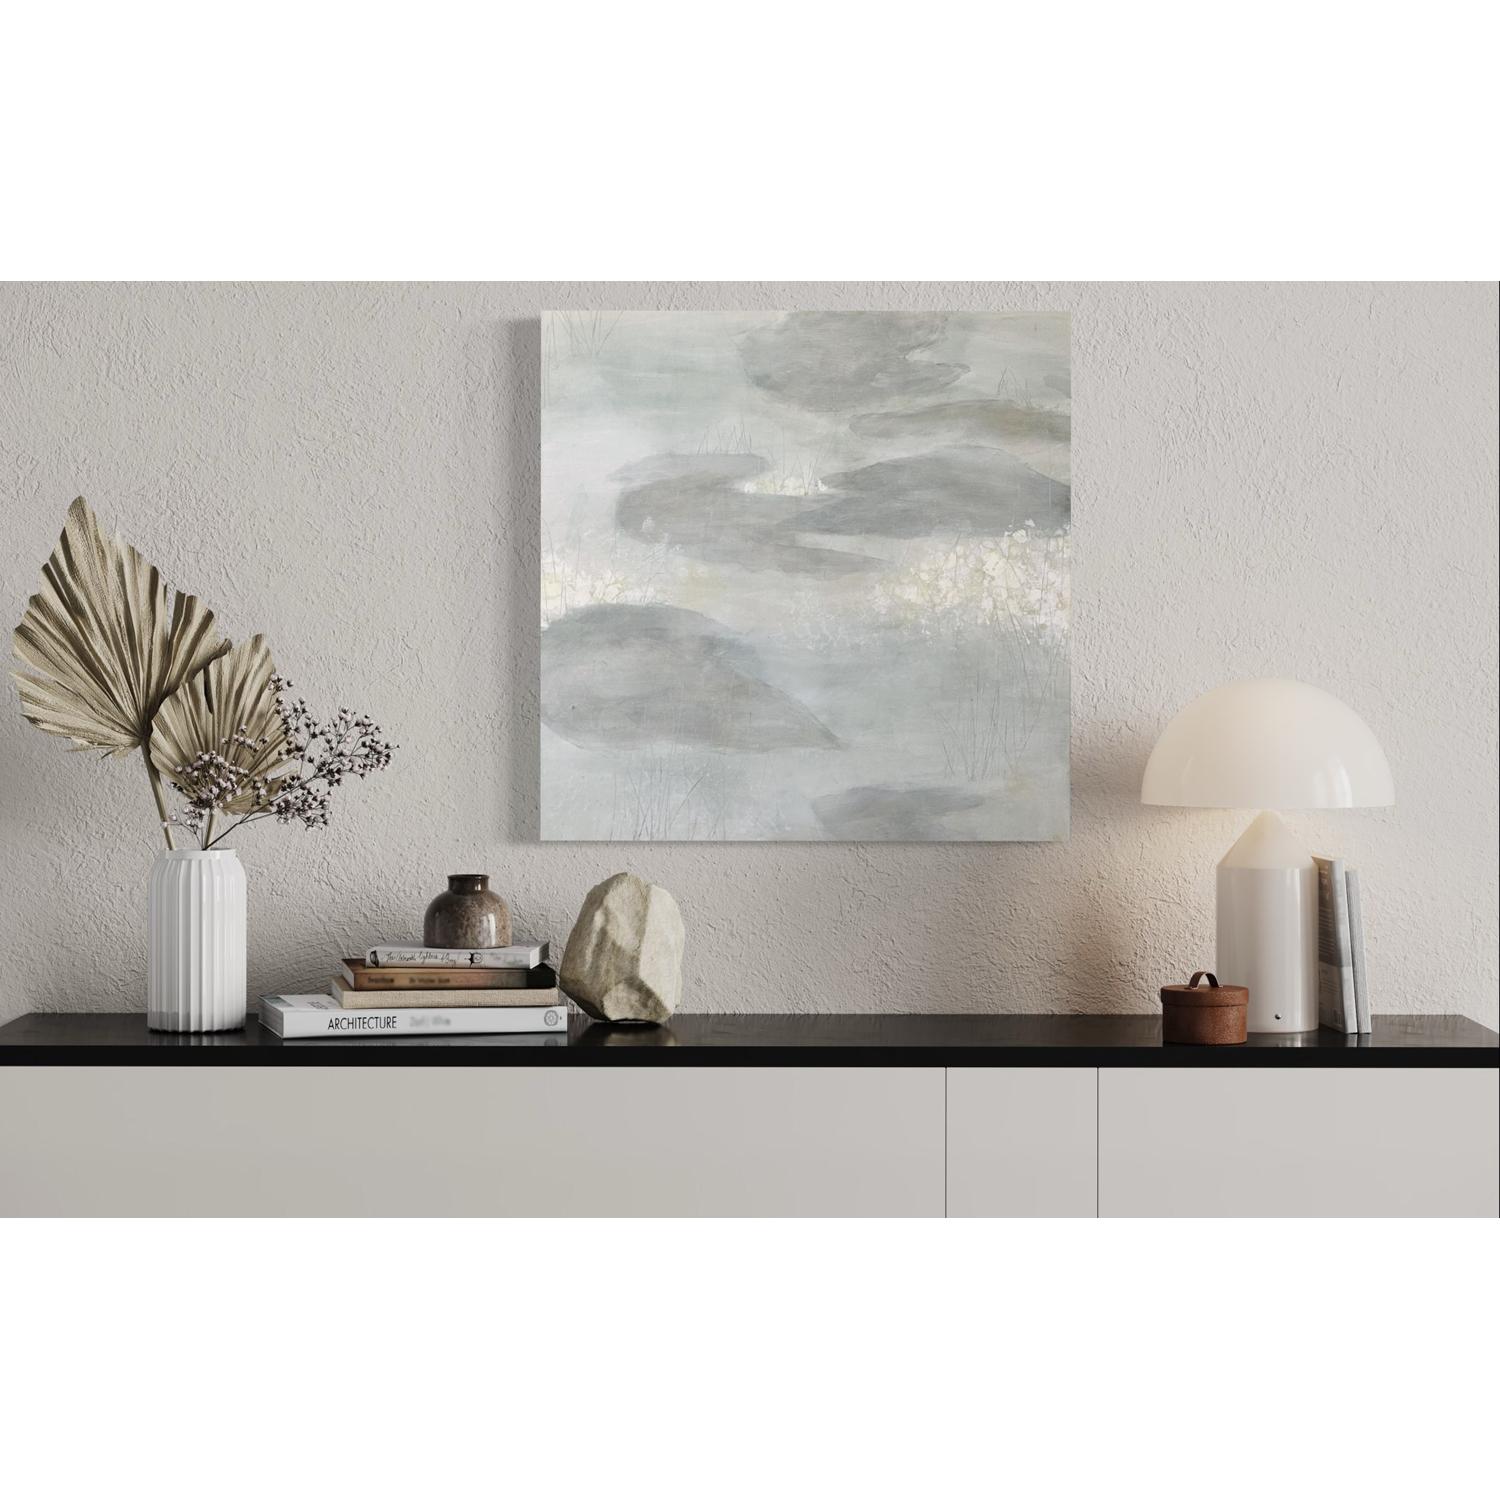 The Pond in February 2, lily pond, neutral, soft art For Sale 2